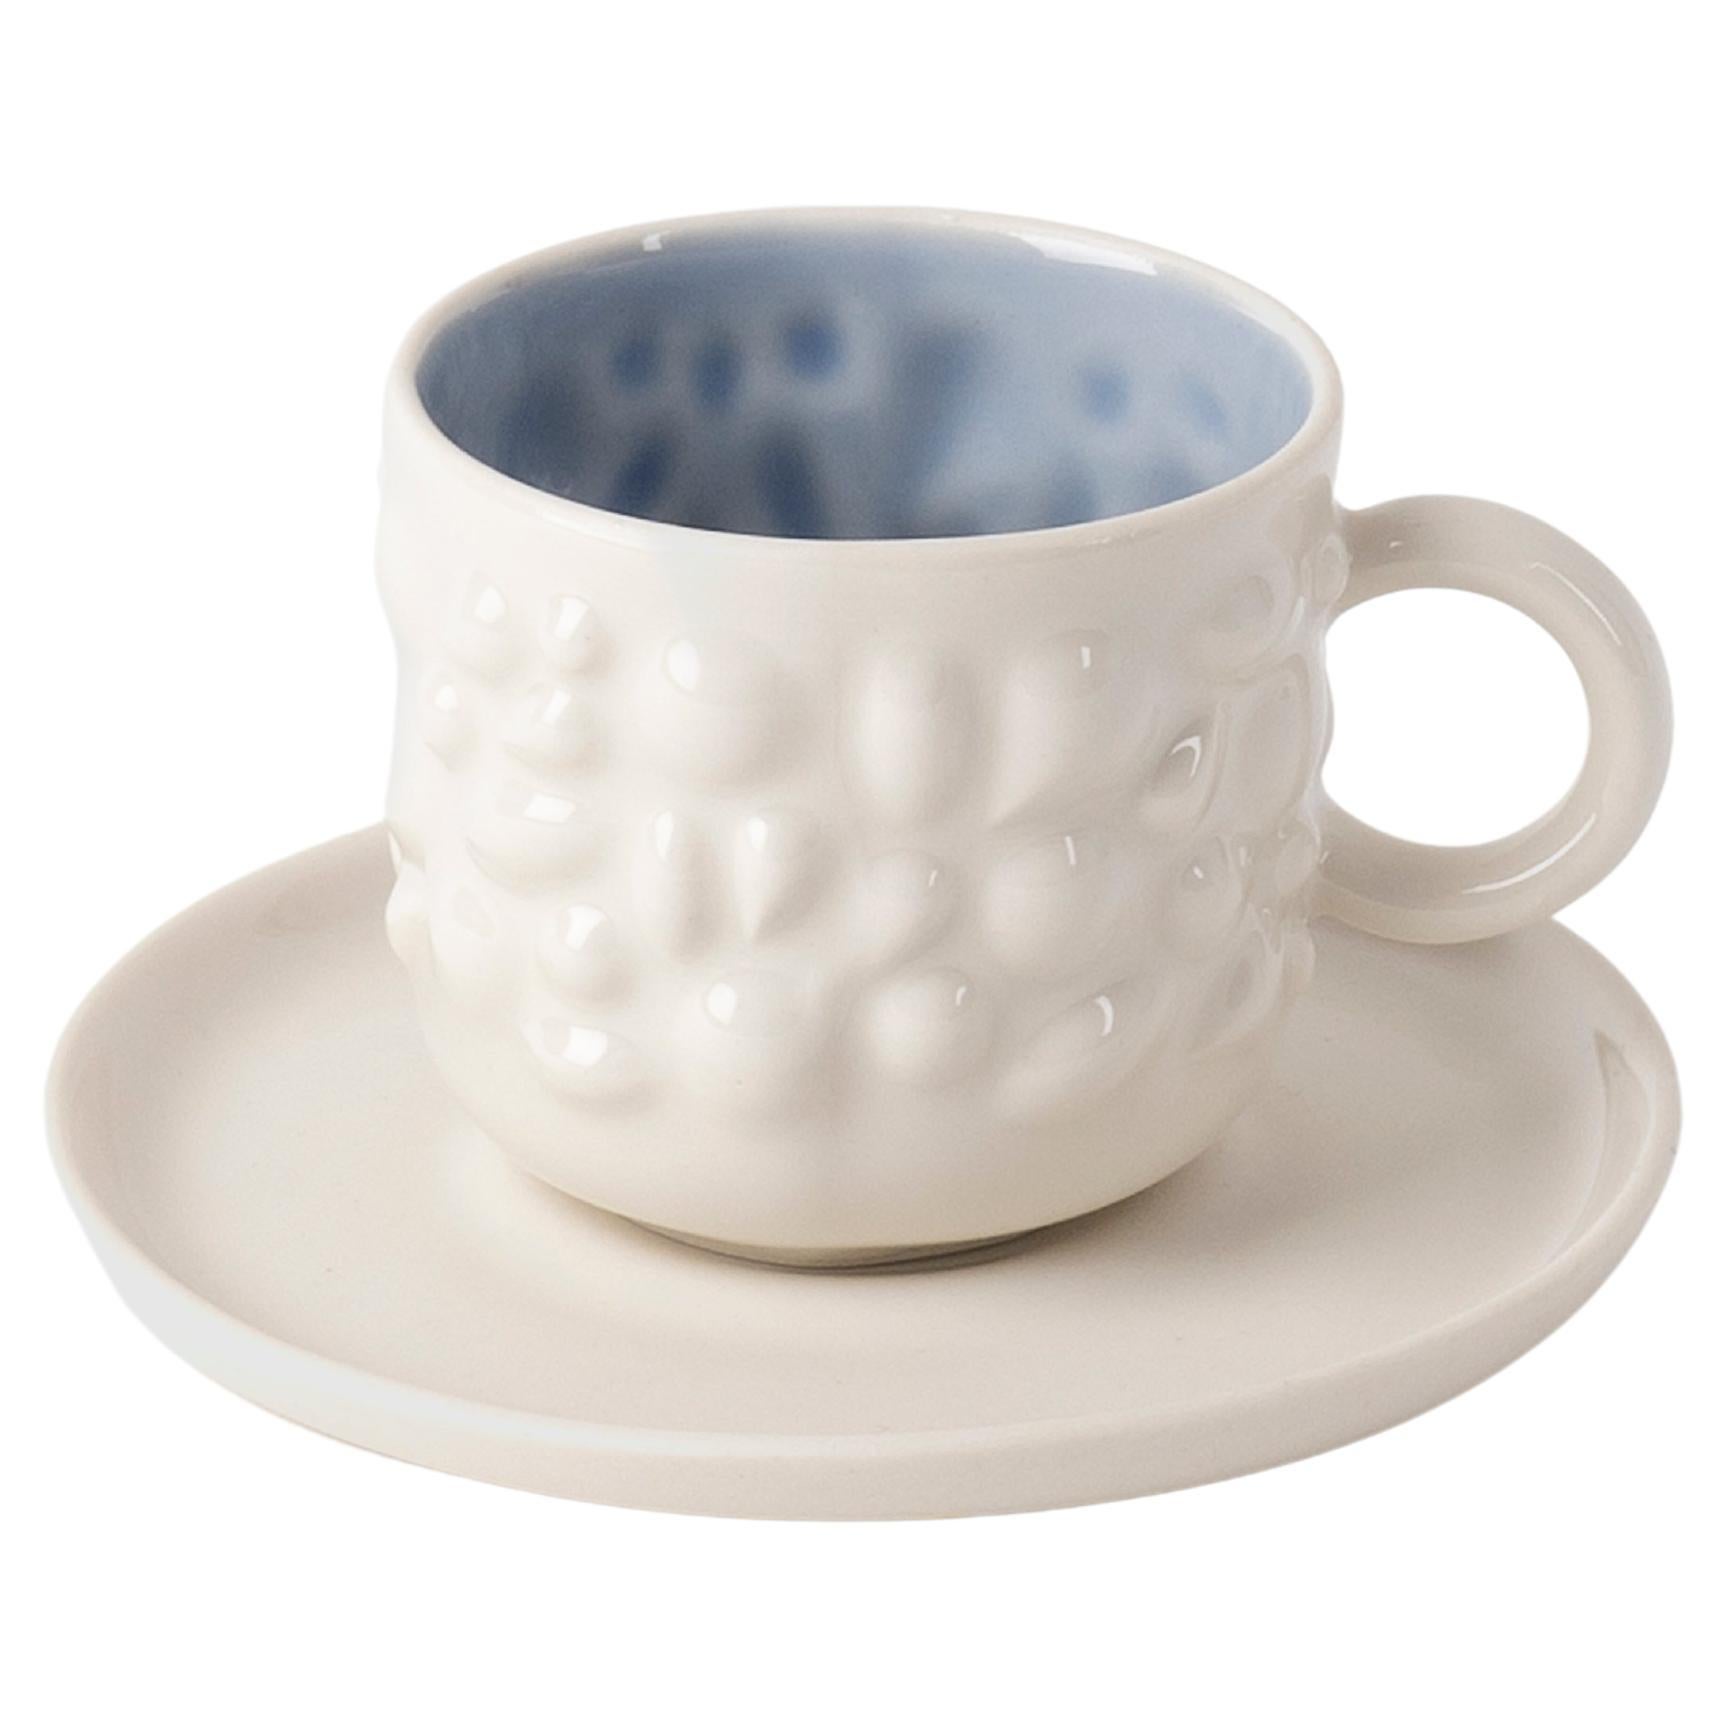 Contemporary Modern, Justine Porcelain Coffee Cup & Saucer 100 ml, White & Blue For Sale